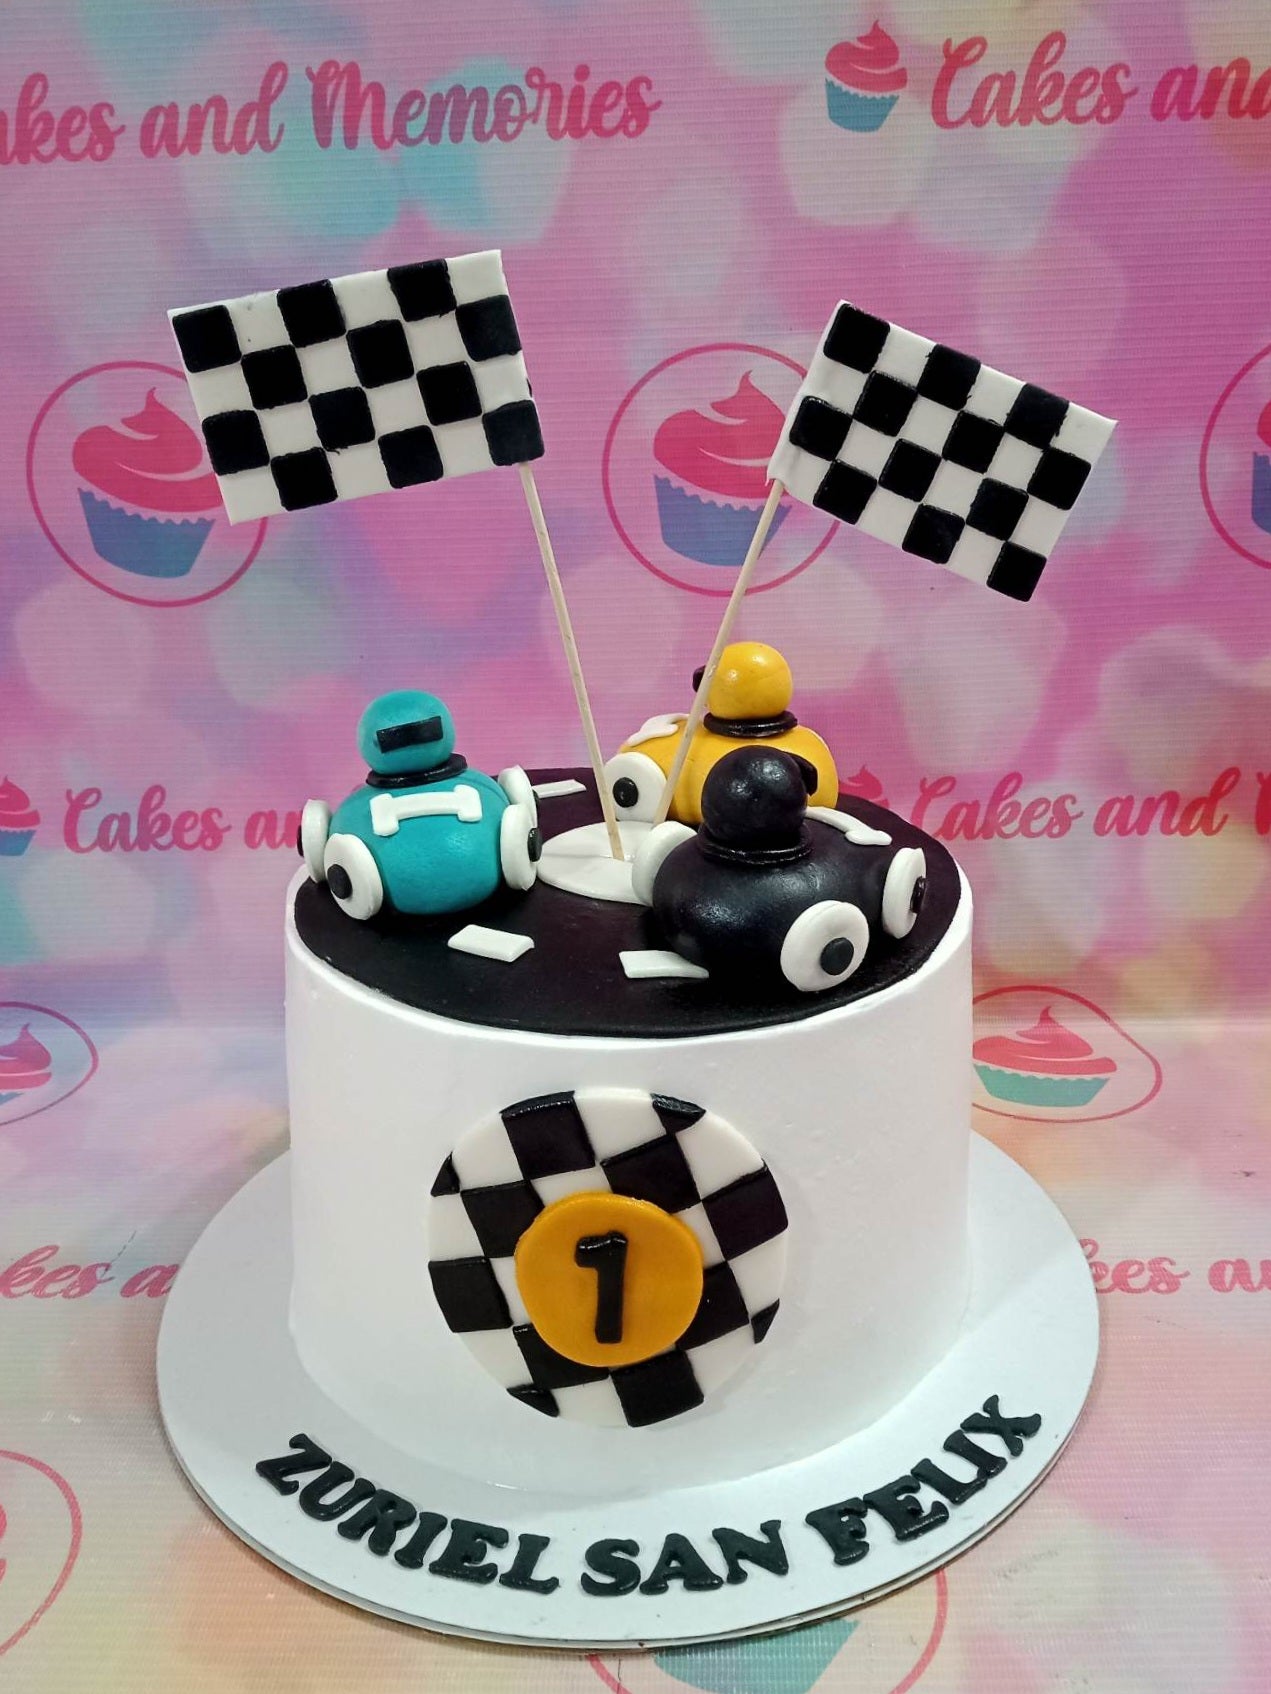 , Uncle

This is the perfect design for the adventurous, speed-loving dad! Our Wheels Cake combines racing, checkered flags and race cars to create a custom cake to celebrate Dad's special day. This Hot Wheels-inspired cake is a truly unique way to make him smile.